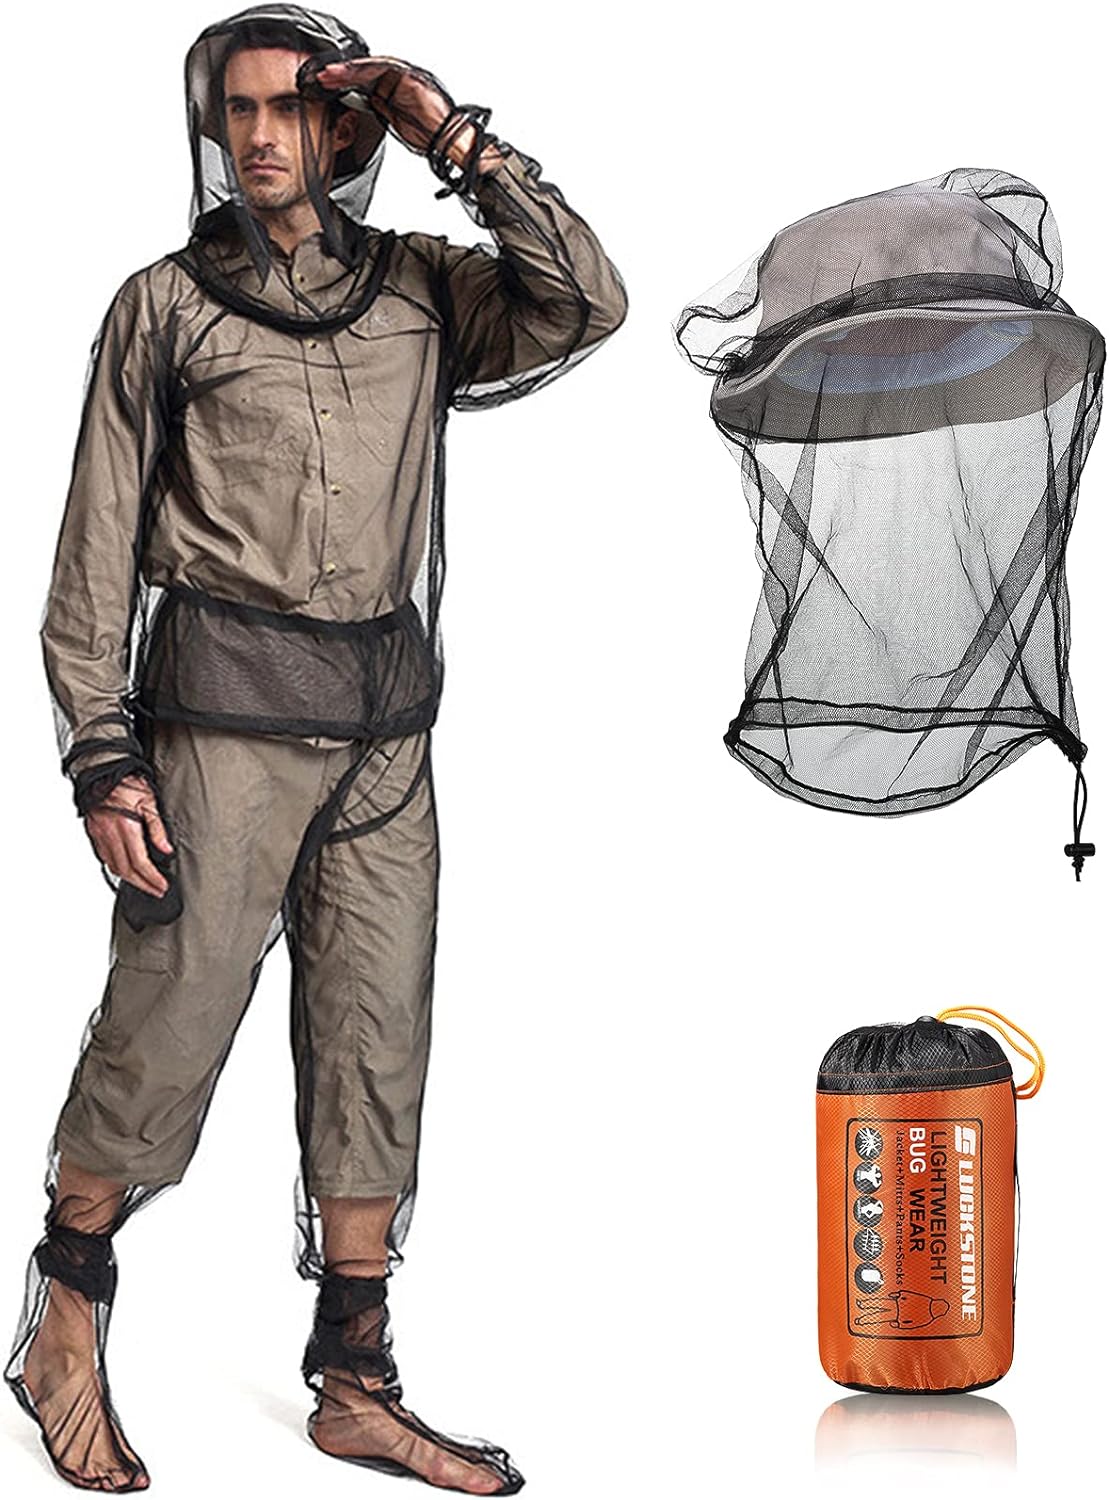 Mosquito Net Suit Include Bug Jacket Hood, Face Covering, Pants Net, Leg Gaiter, Gloves and Storage Sack Mosquito Net Protecting Whole Body Repellent Clothing for Outdoor Camping Fly Fishing